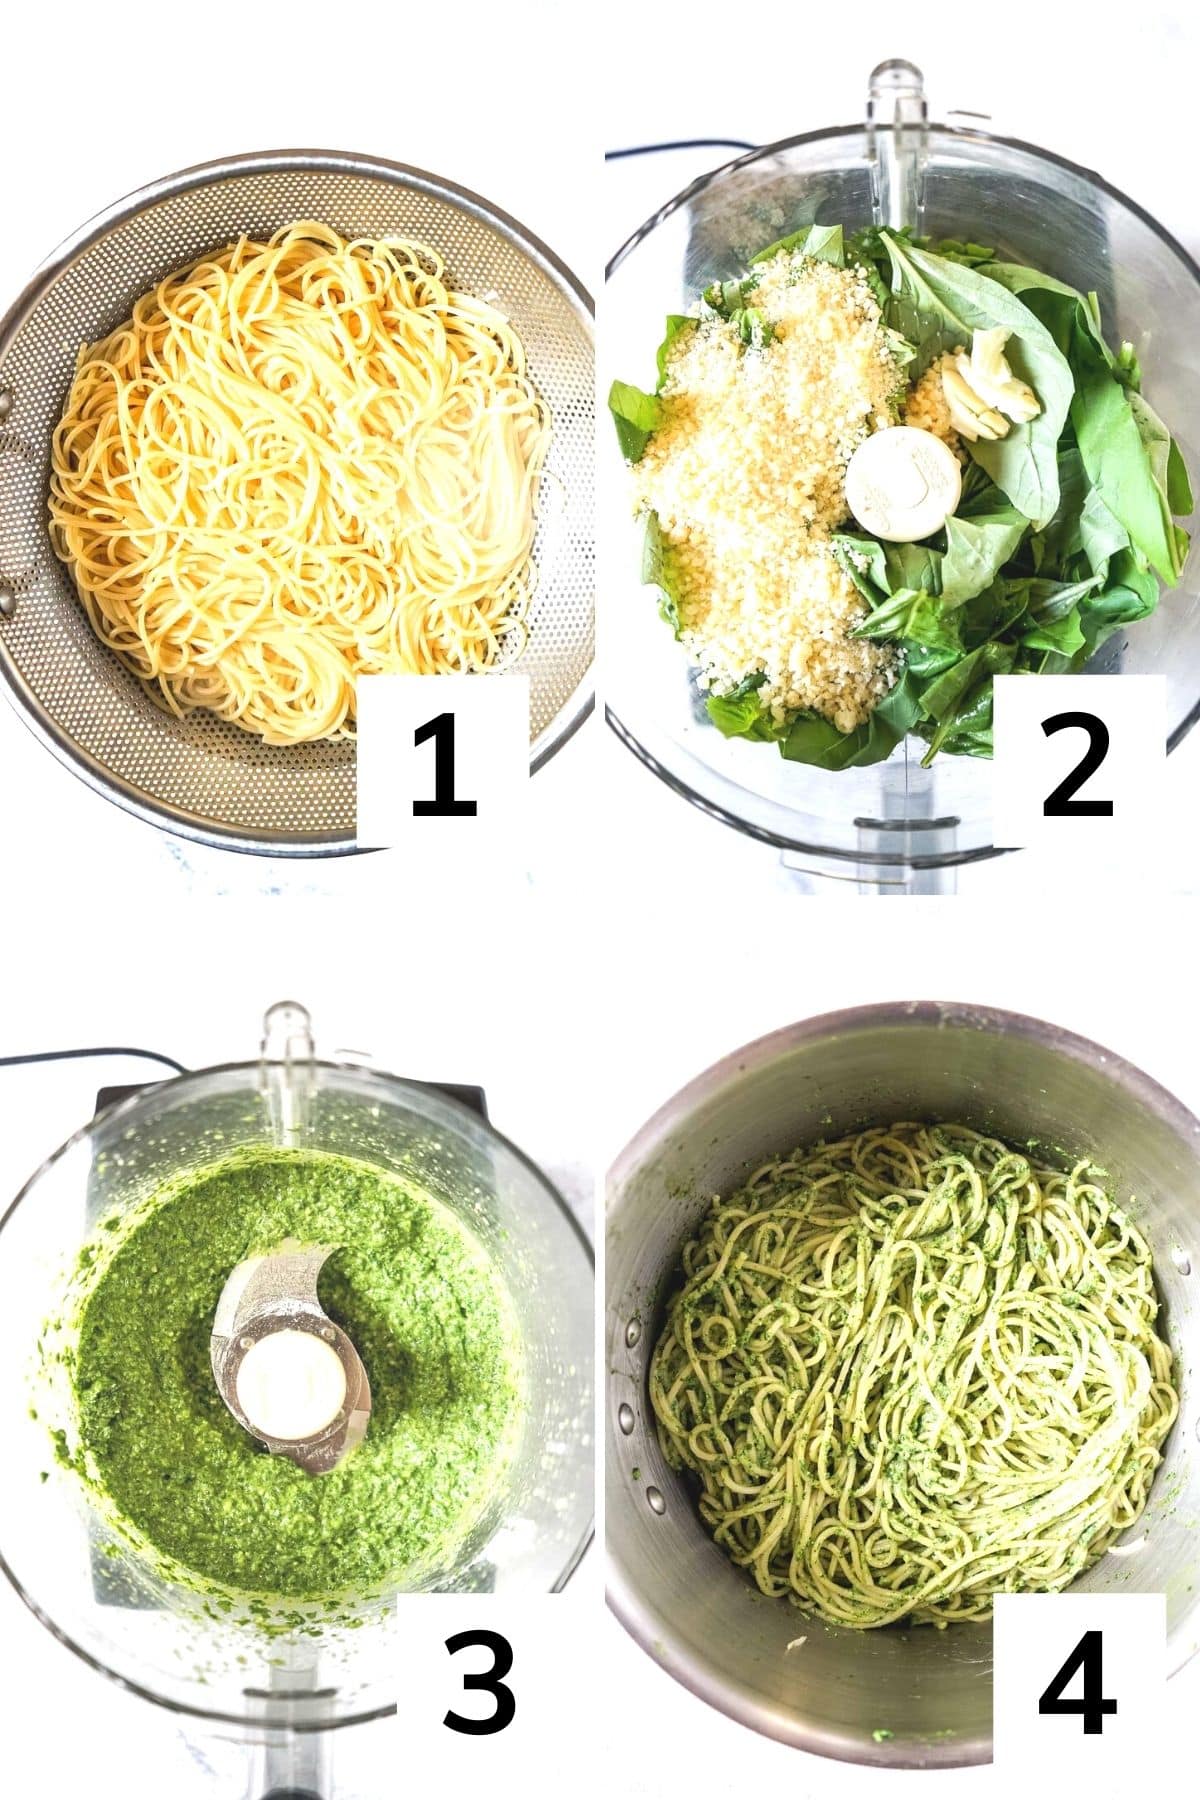 How to make pasta with green sauce step by step.